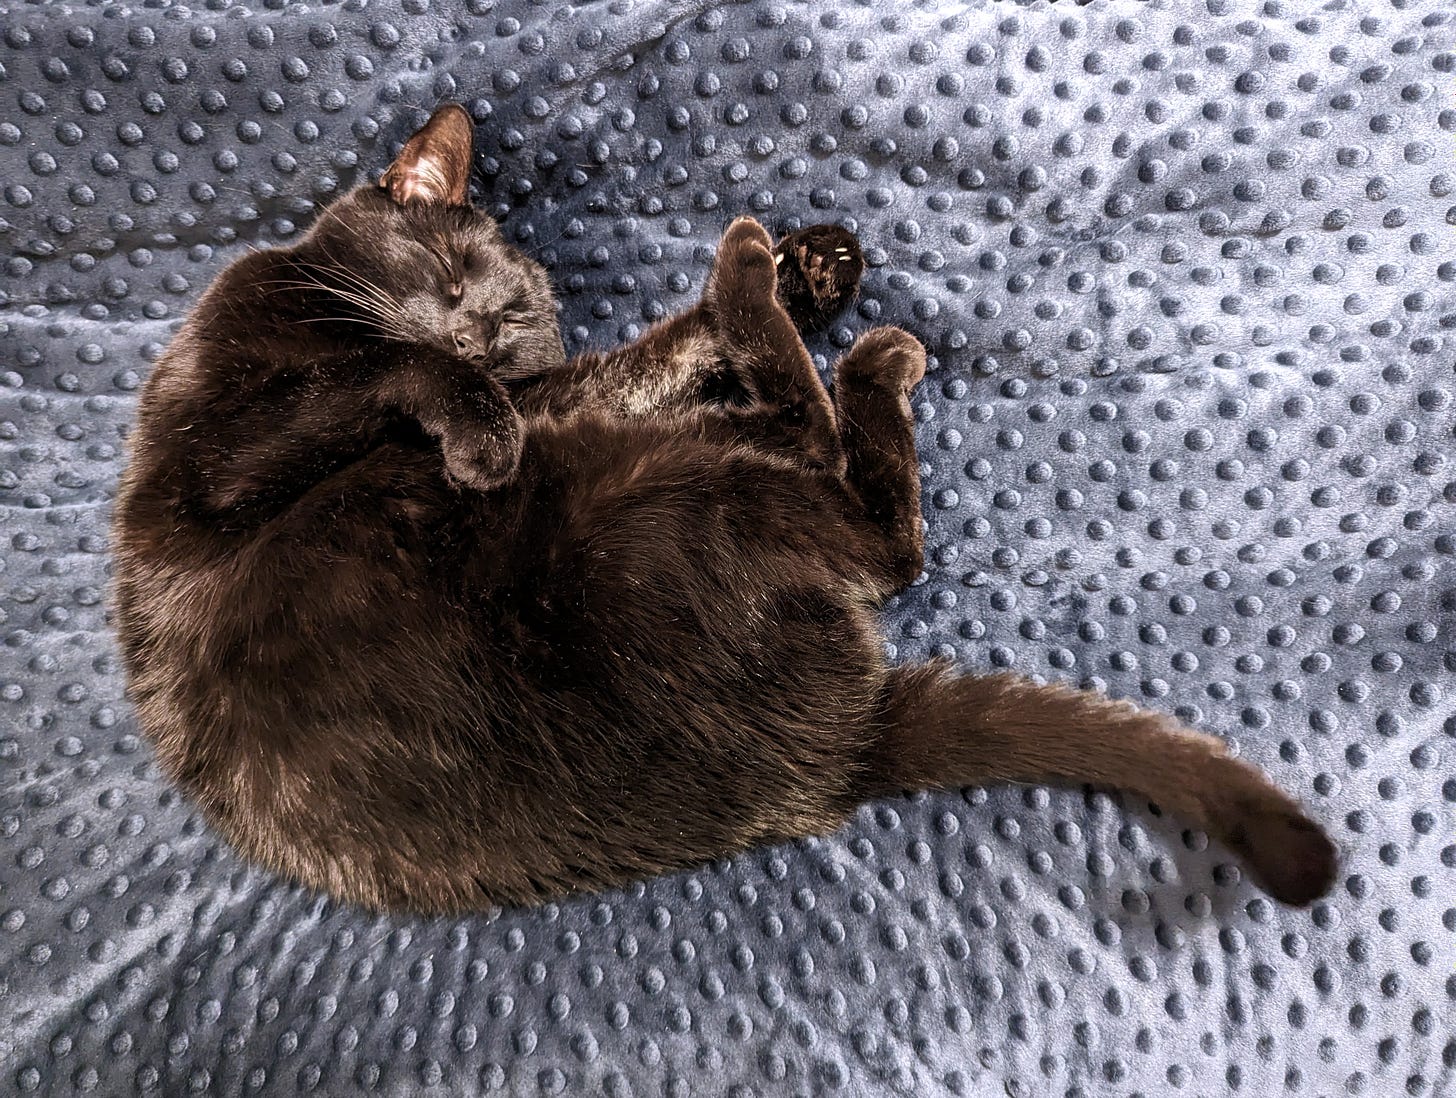 A black cat curls up on a velvety blue blanket with raised dots.